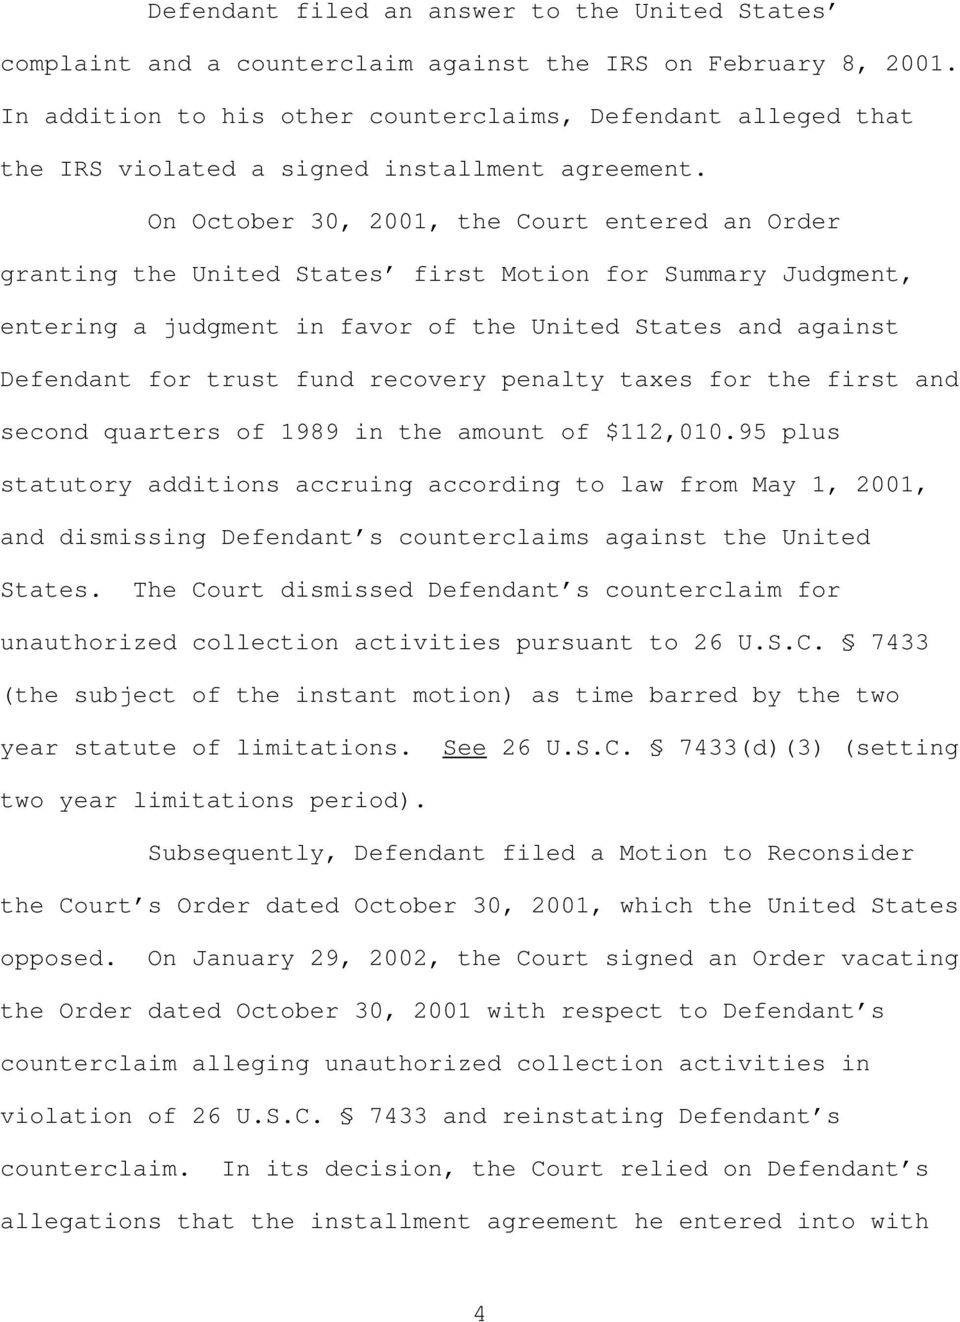 On October 30, 2001, the Court entered an Order granting the United States first Motion for Summary Judgment, entering a judgment in favor of the United States and against Defendant for trust fund